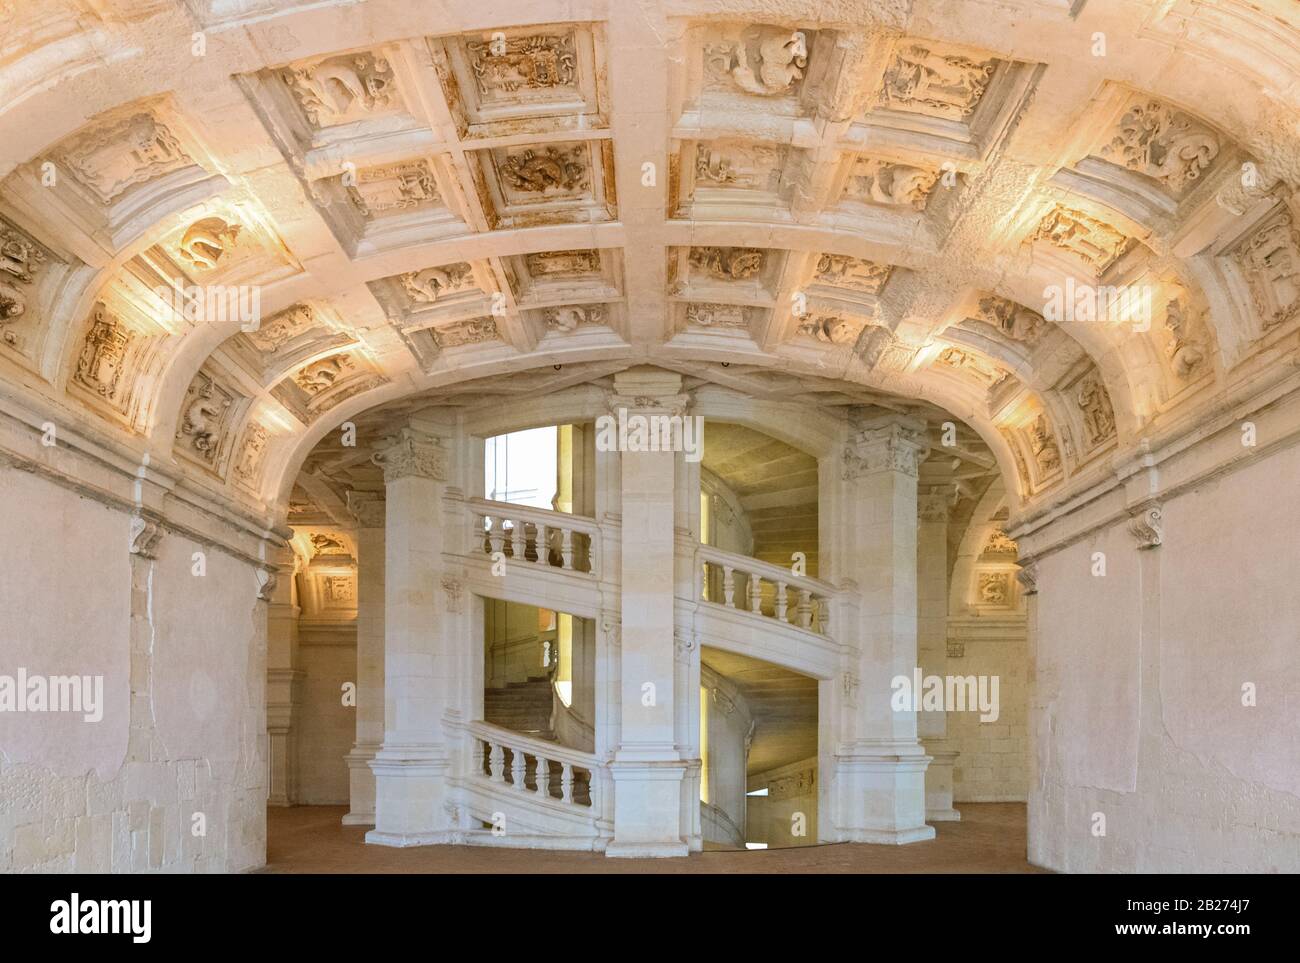 Chambord, France - November 14, 2018: The double helix staircase of the Chambord castle seen from the second floor Stock Photo